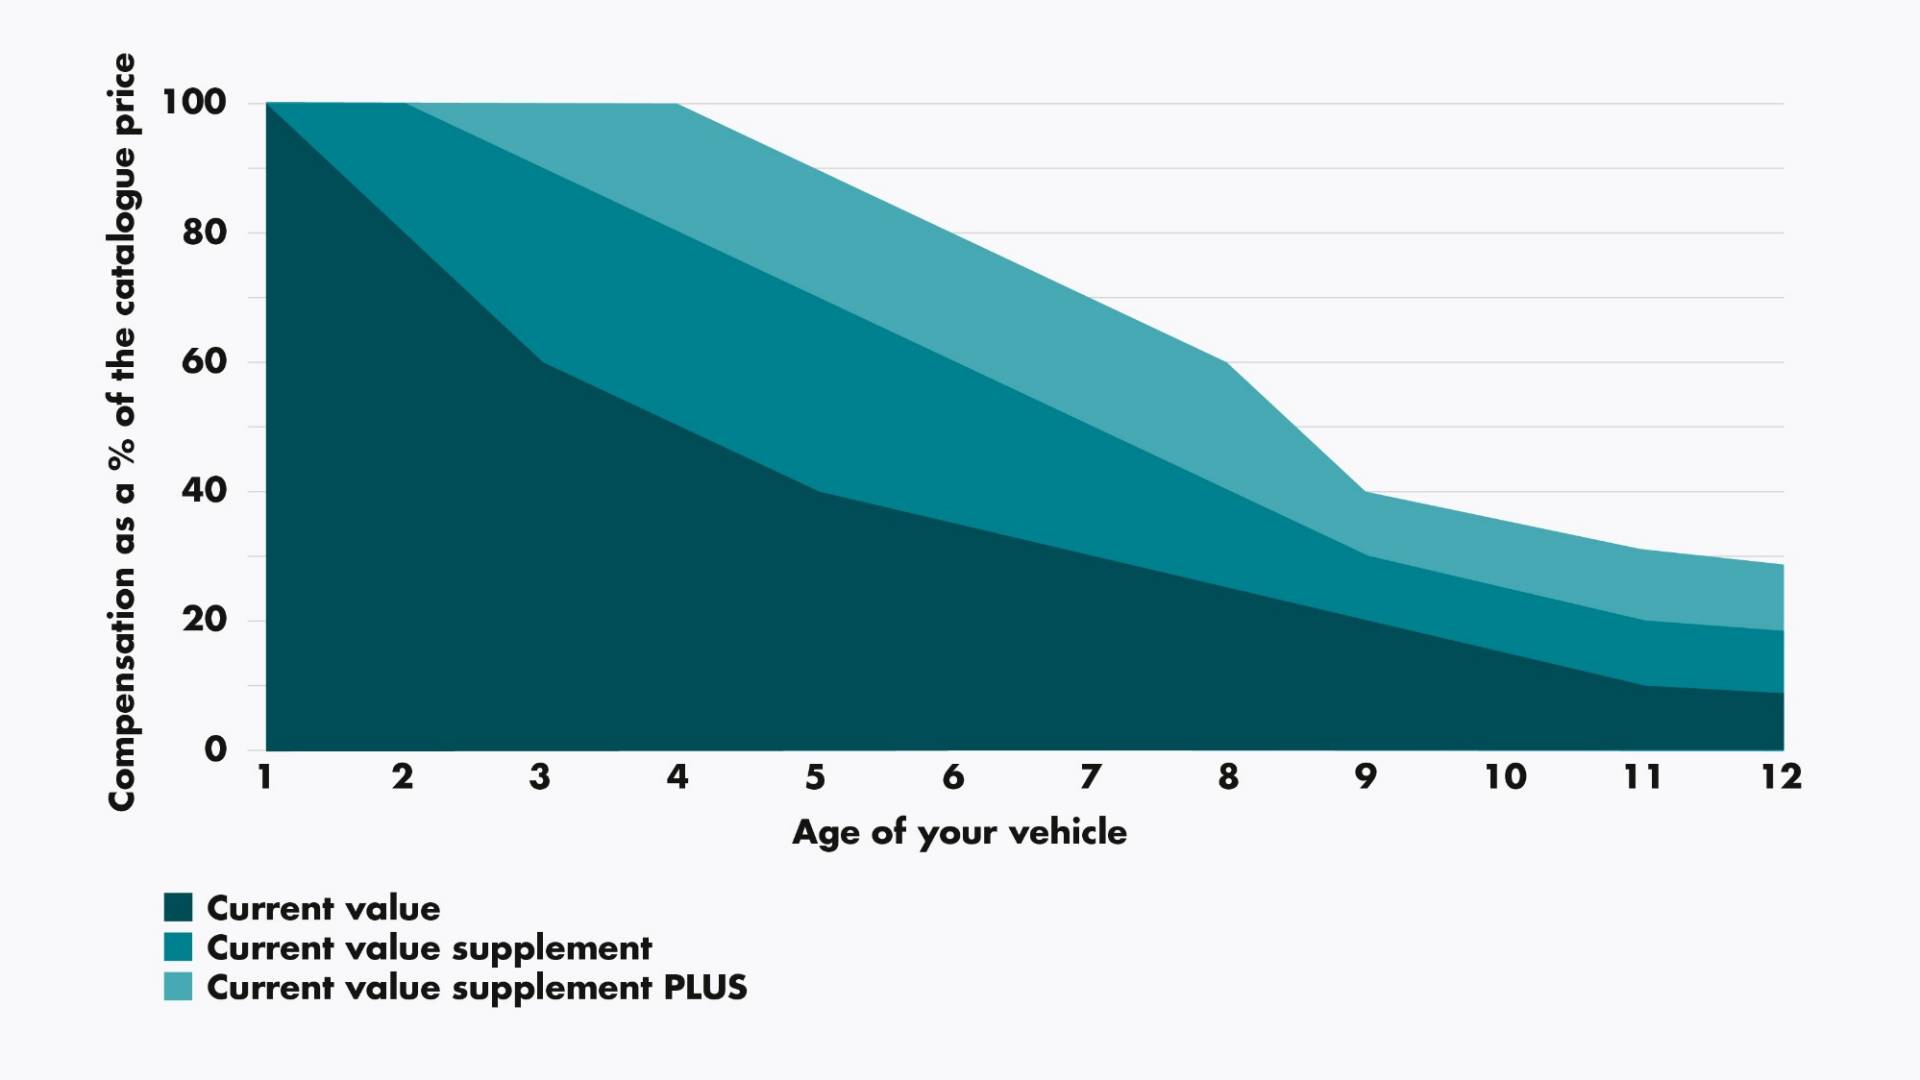 Graphic: Current value supplement insurance